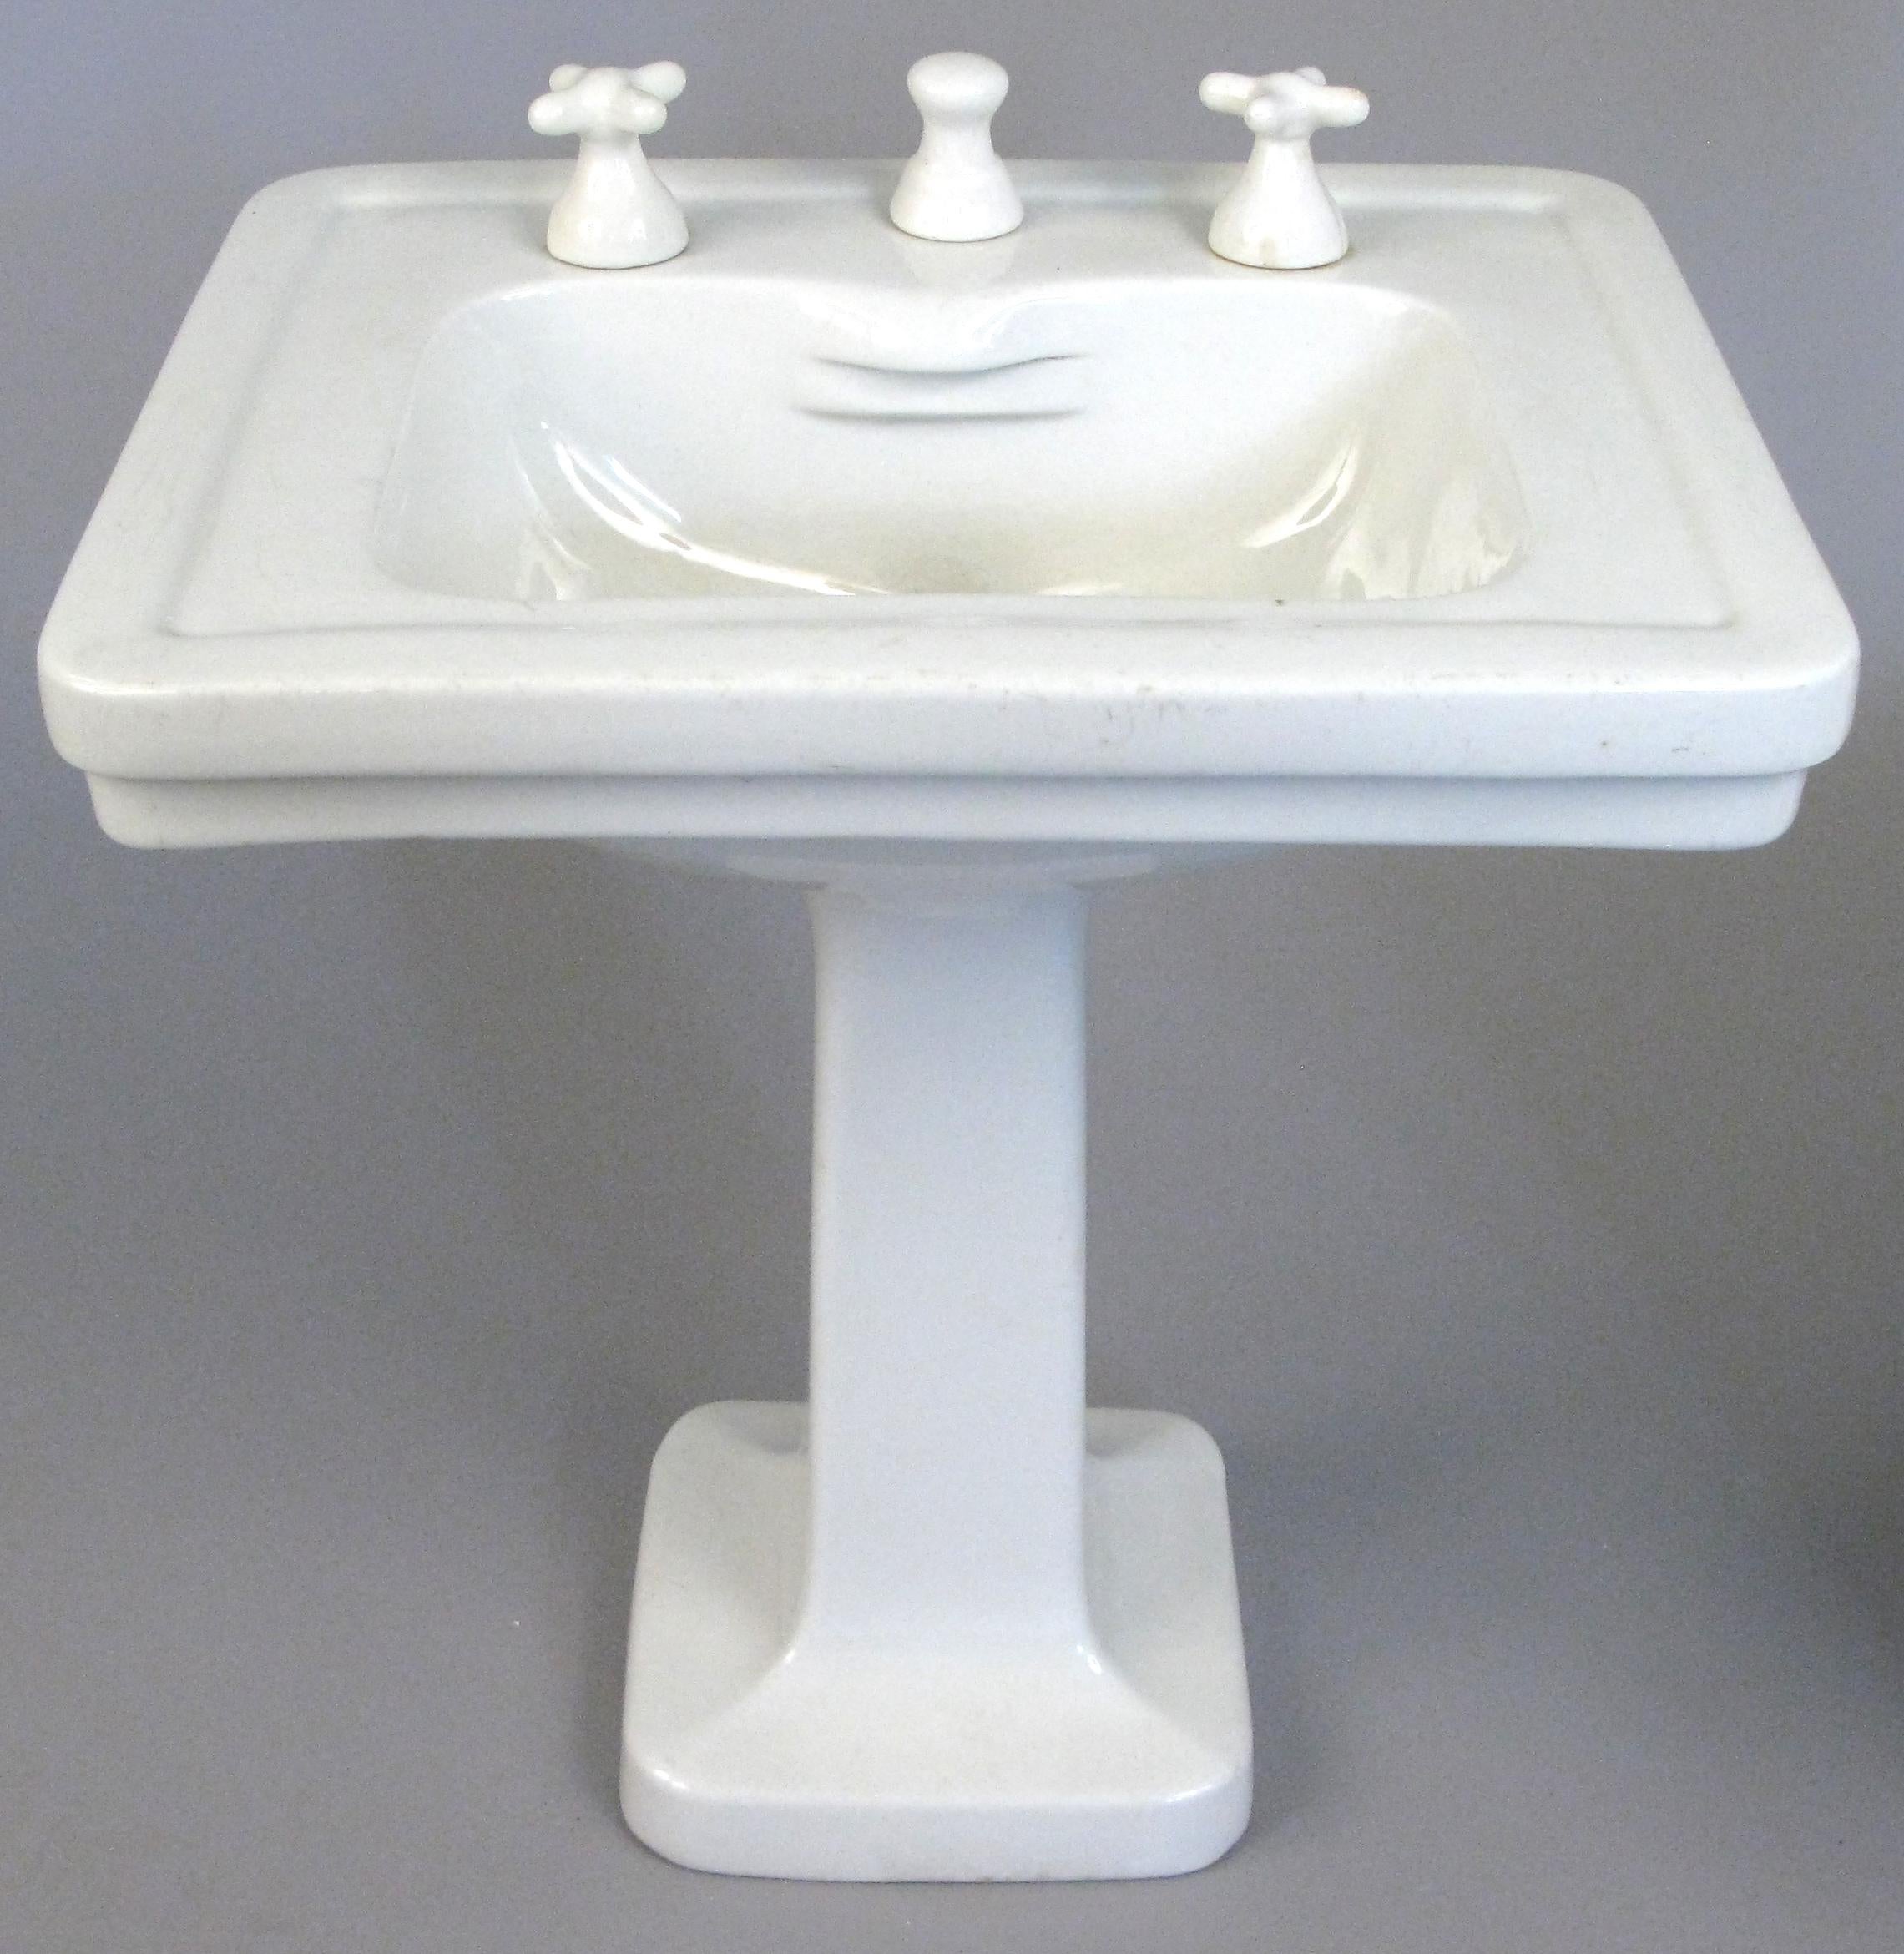 a charming and rare set of small scale antique porcelain display samples of a pedestal sink and companion soaking tub, by Maddocks Madbury. 

Sink dimensions: 15.5